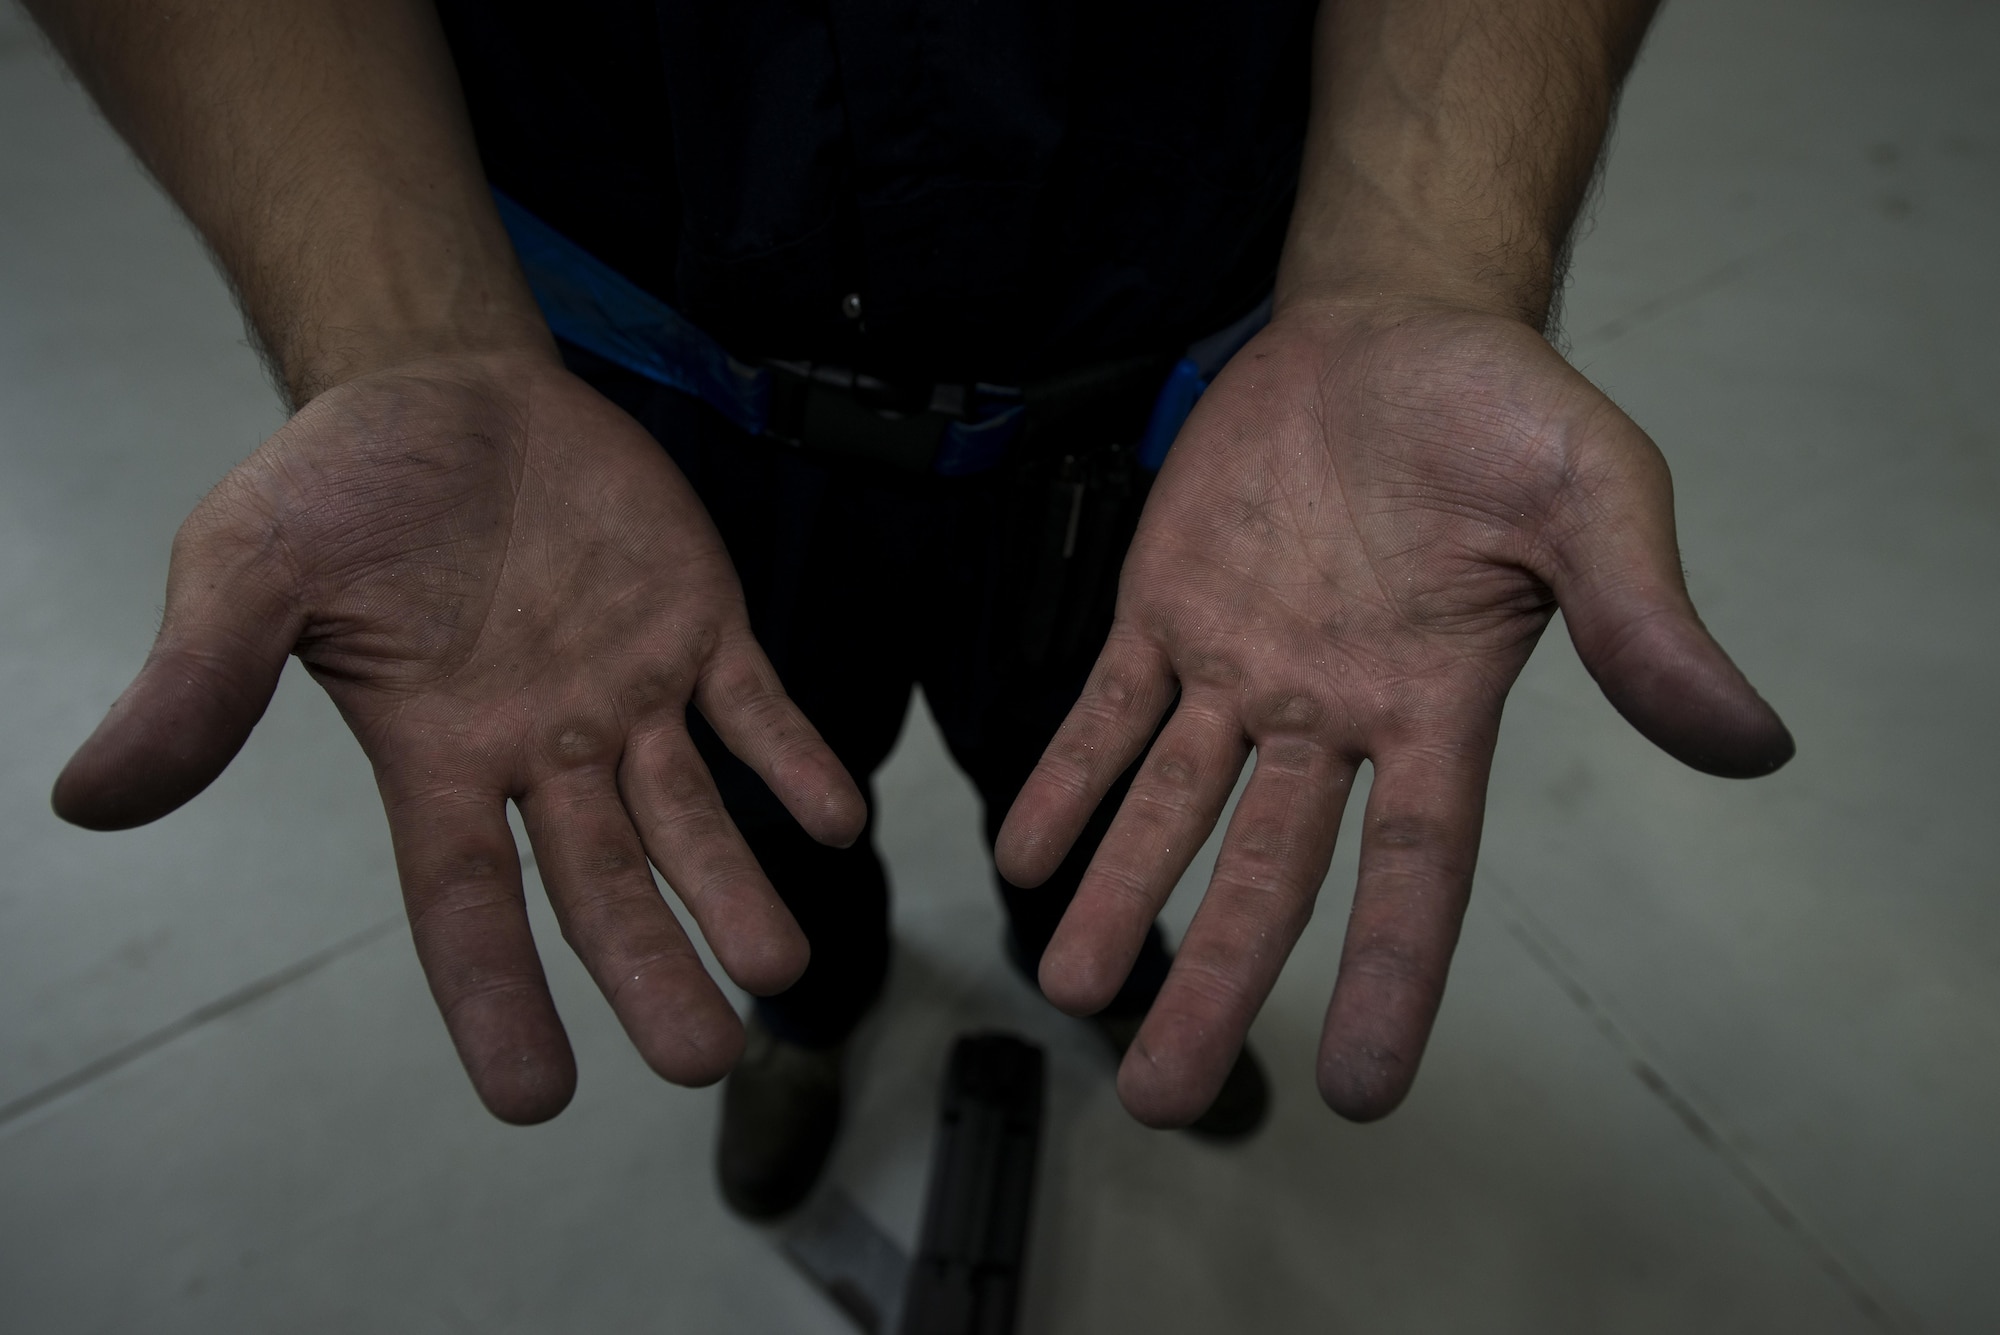 Staff Sgt. Richard Brazen, 437th Maintenance Squadron Sheet Metal and Corrosion Shop aircraft structure technician, shows his hands after working on a damaged C-17 Globemaster III at Joint Base Charleston, South Carolina, Sept. 14, 2016. The Sheet Metal and Corrosion shop is responsible for repair of the aircraft structure, composites and corrosion control of the C-17. 